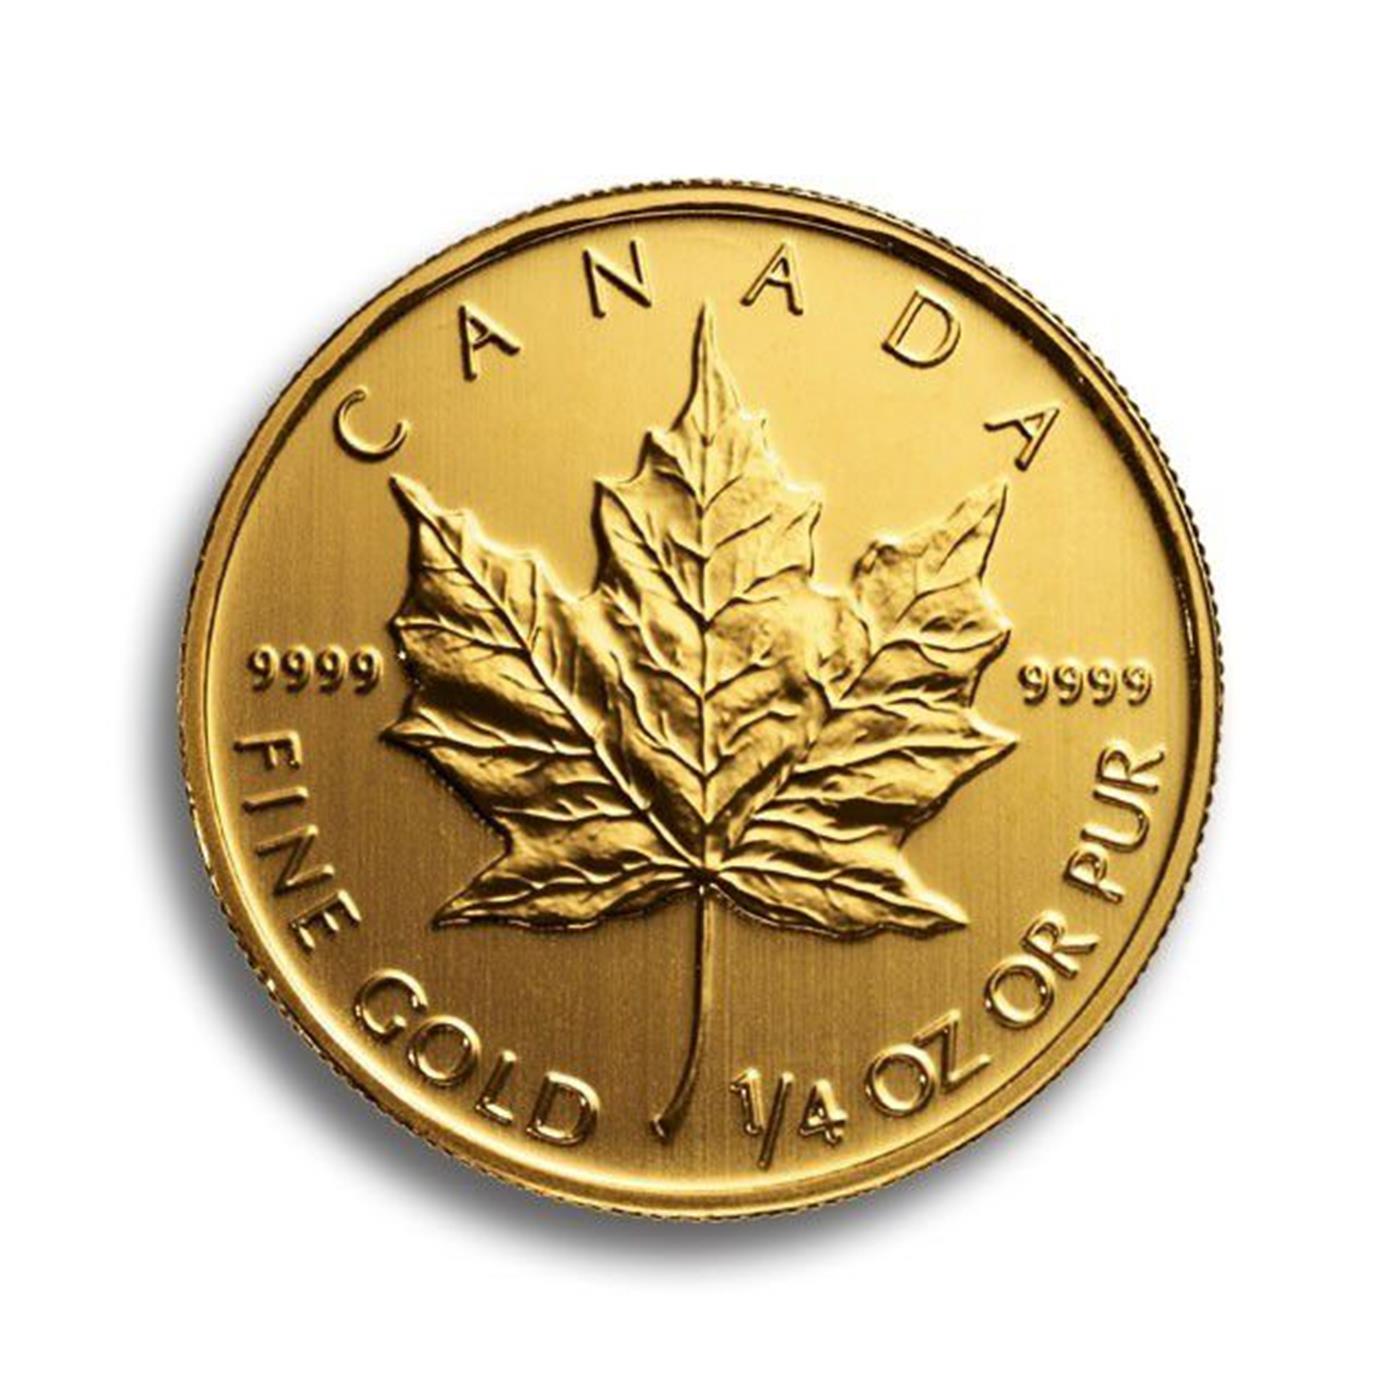 1/4oz Canadian Maple Leaf Gold Coin